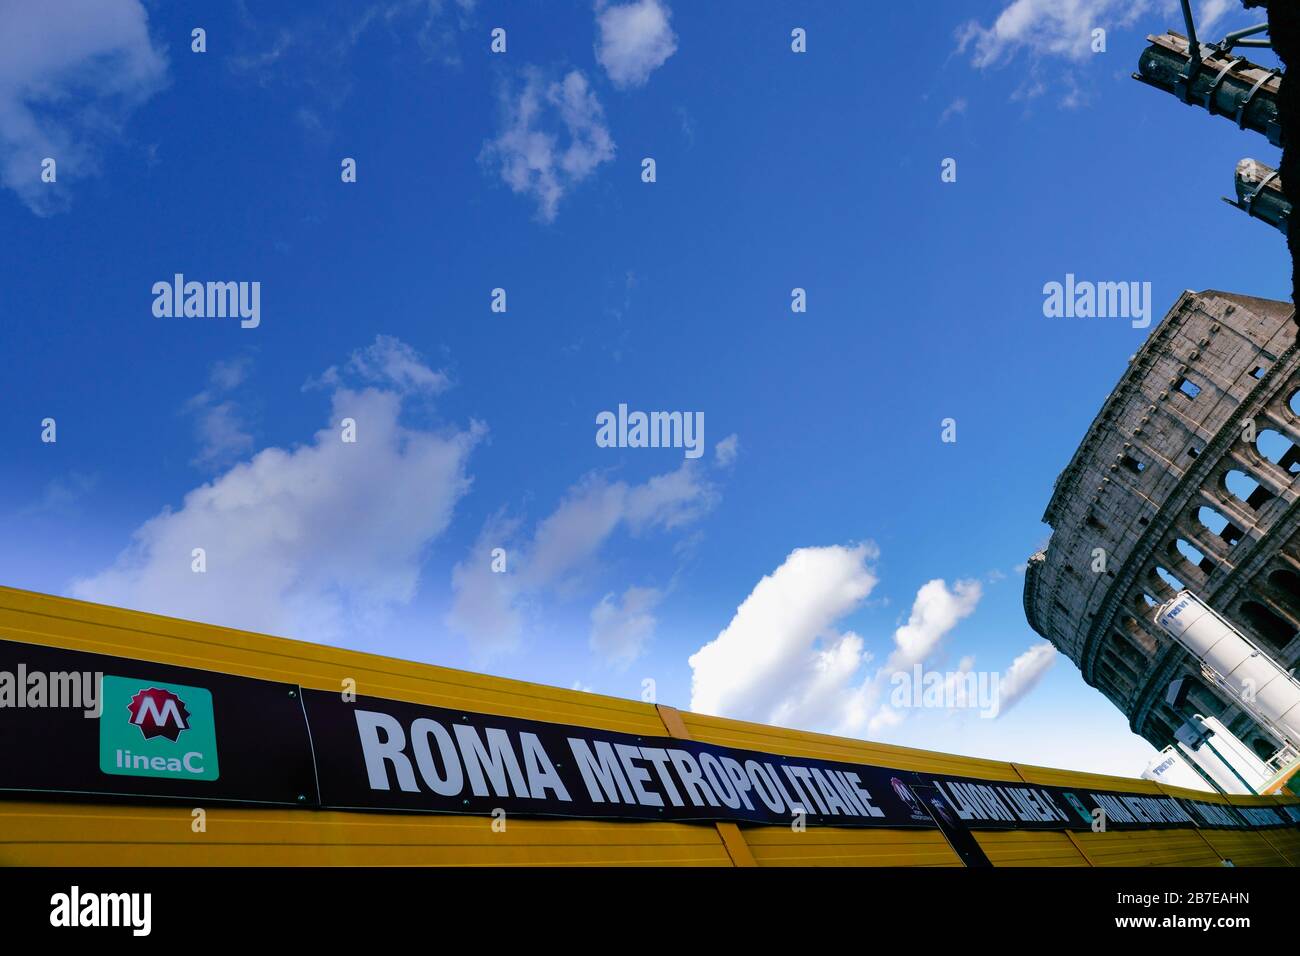 Construction site for the new C metro line, subway, underground. Signage in the foreground, Colosseum on the background. Rome historic centre. Italy. Stock Photo